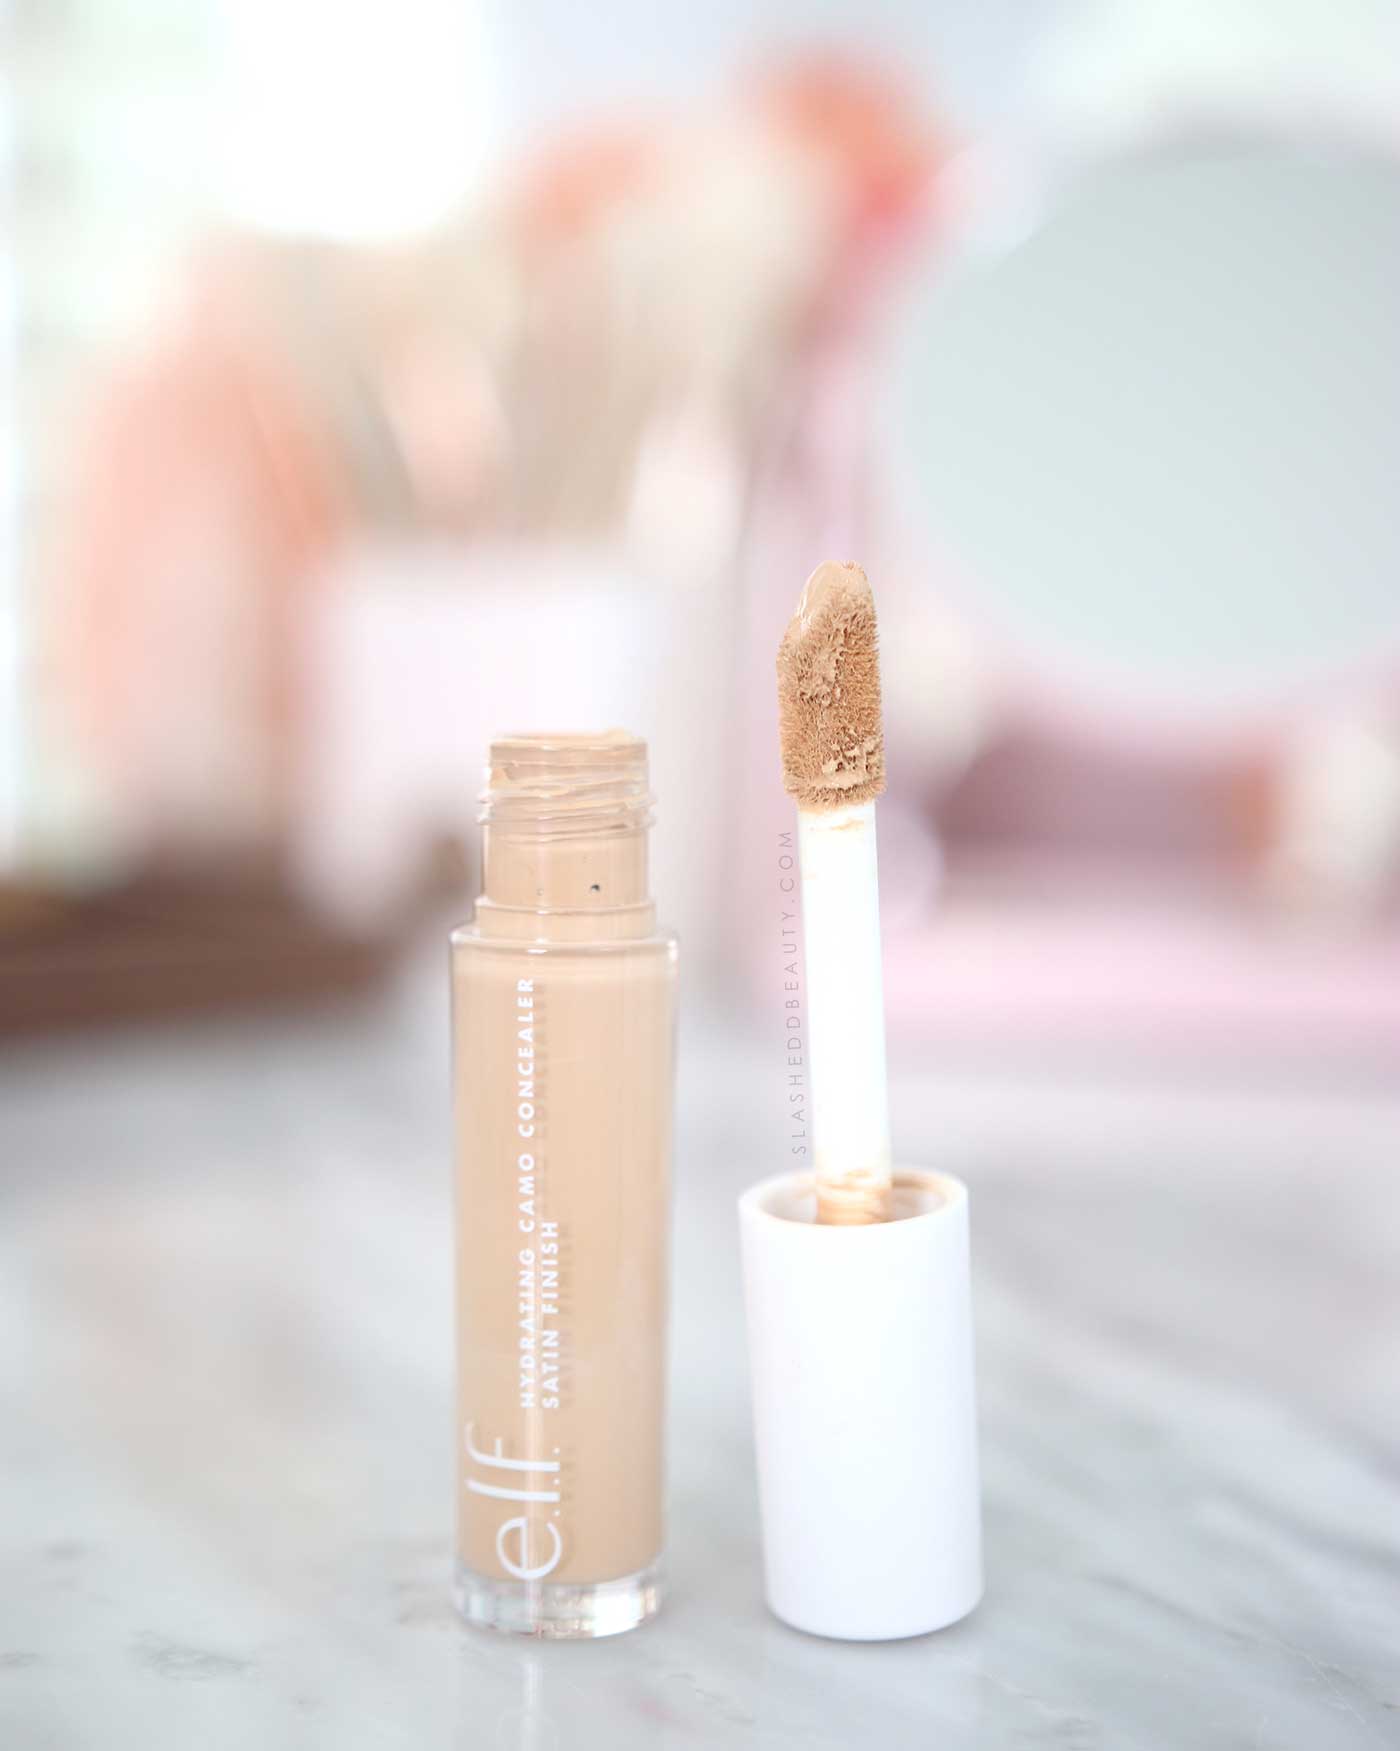 e.l.f. Hydrating Camo Concealer Review & Swatches | e.l.f. Camo Concealer Comparison New vs Old | Slashed Beauty